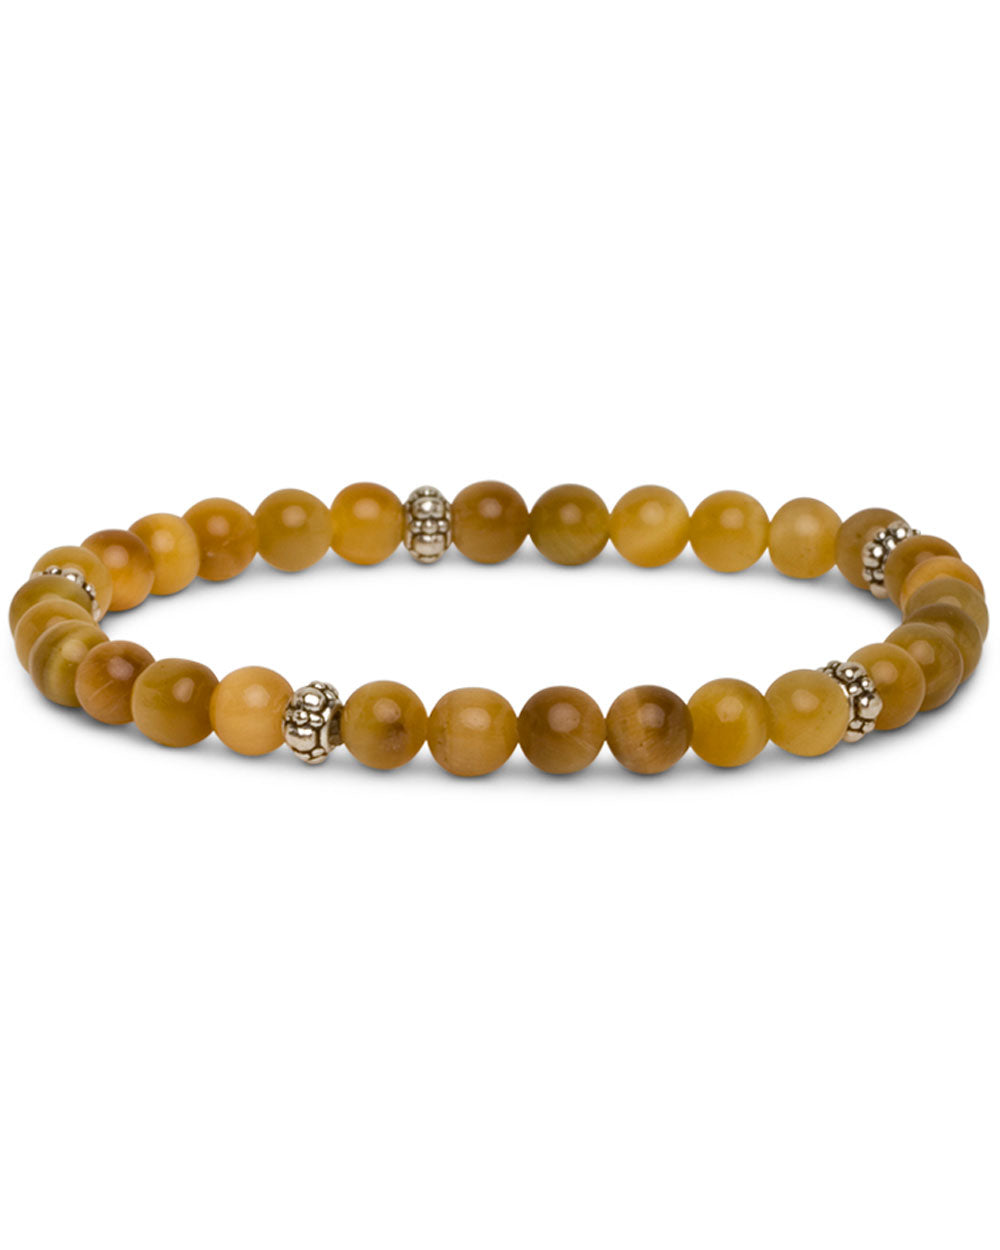 Tigers Eye with Sterling Silver Bead Bracelet